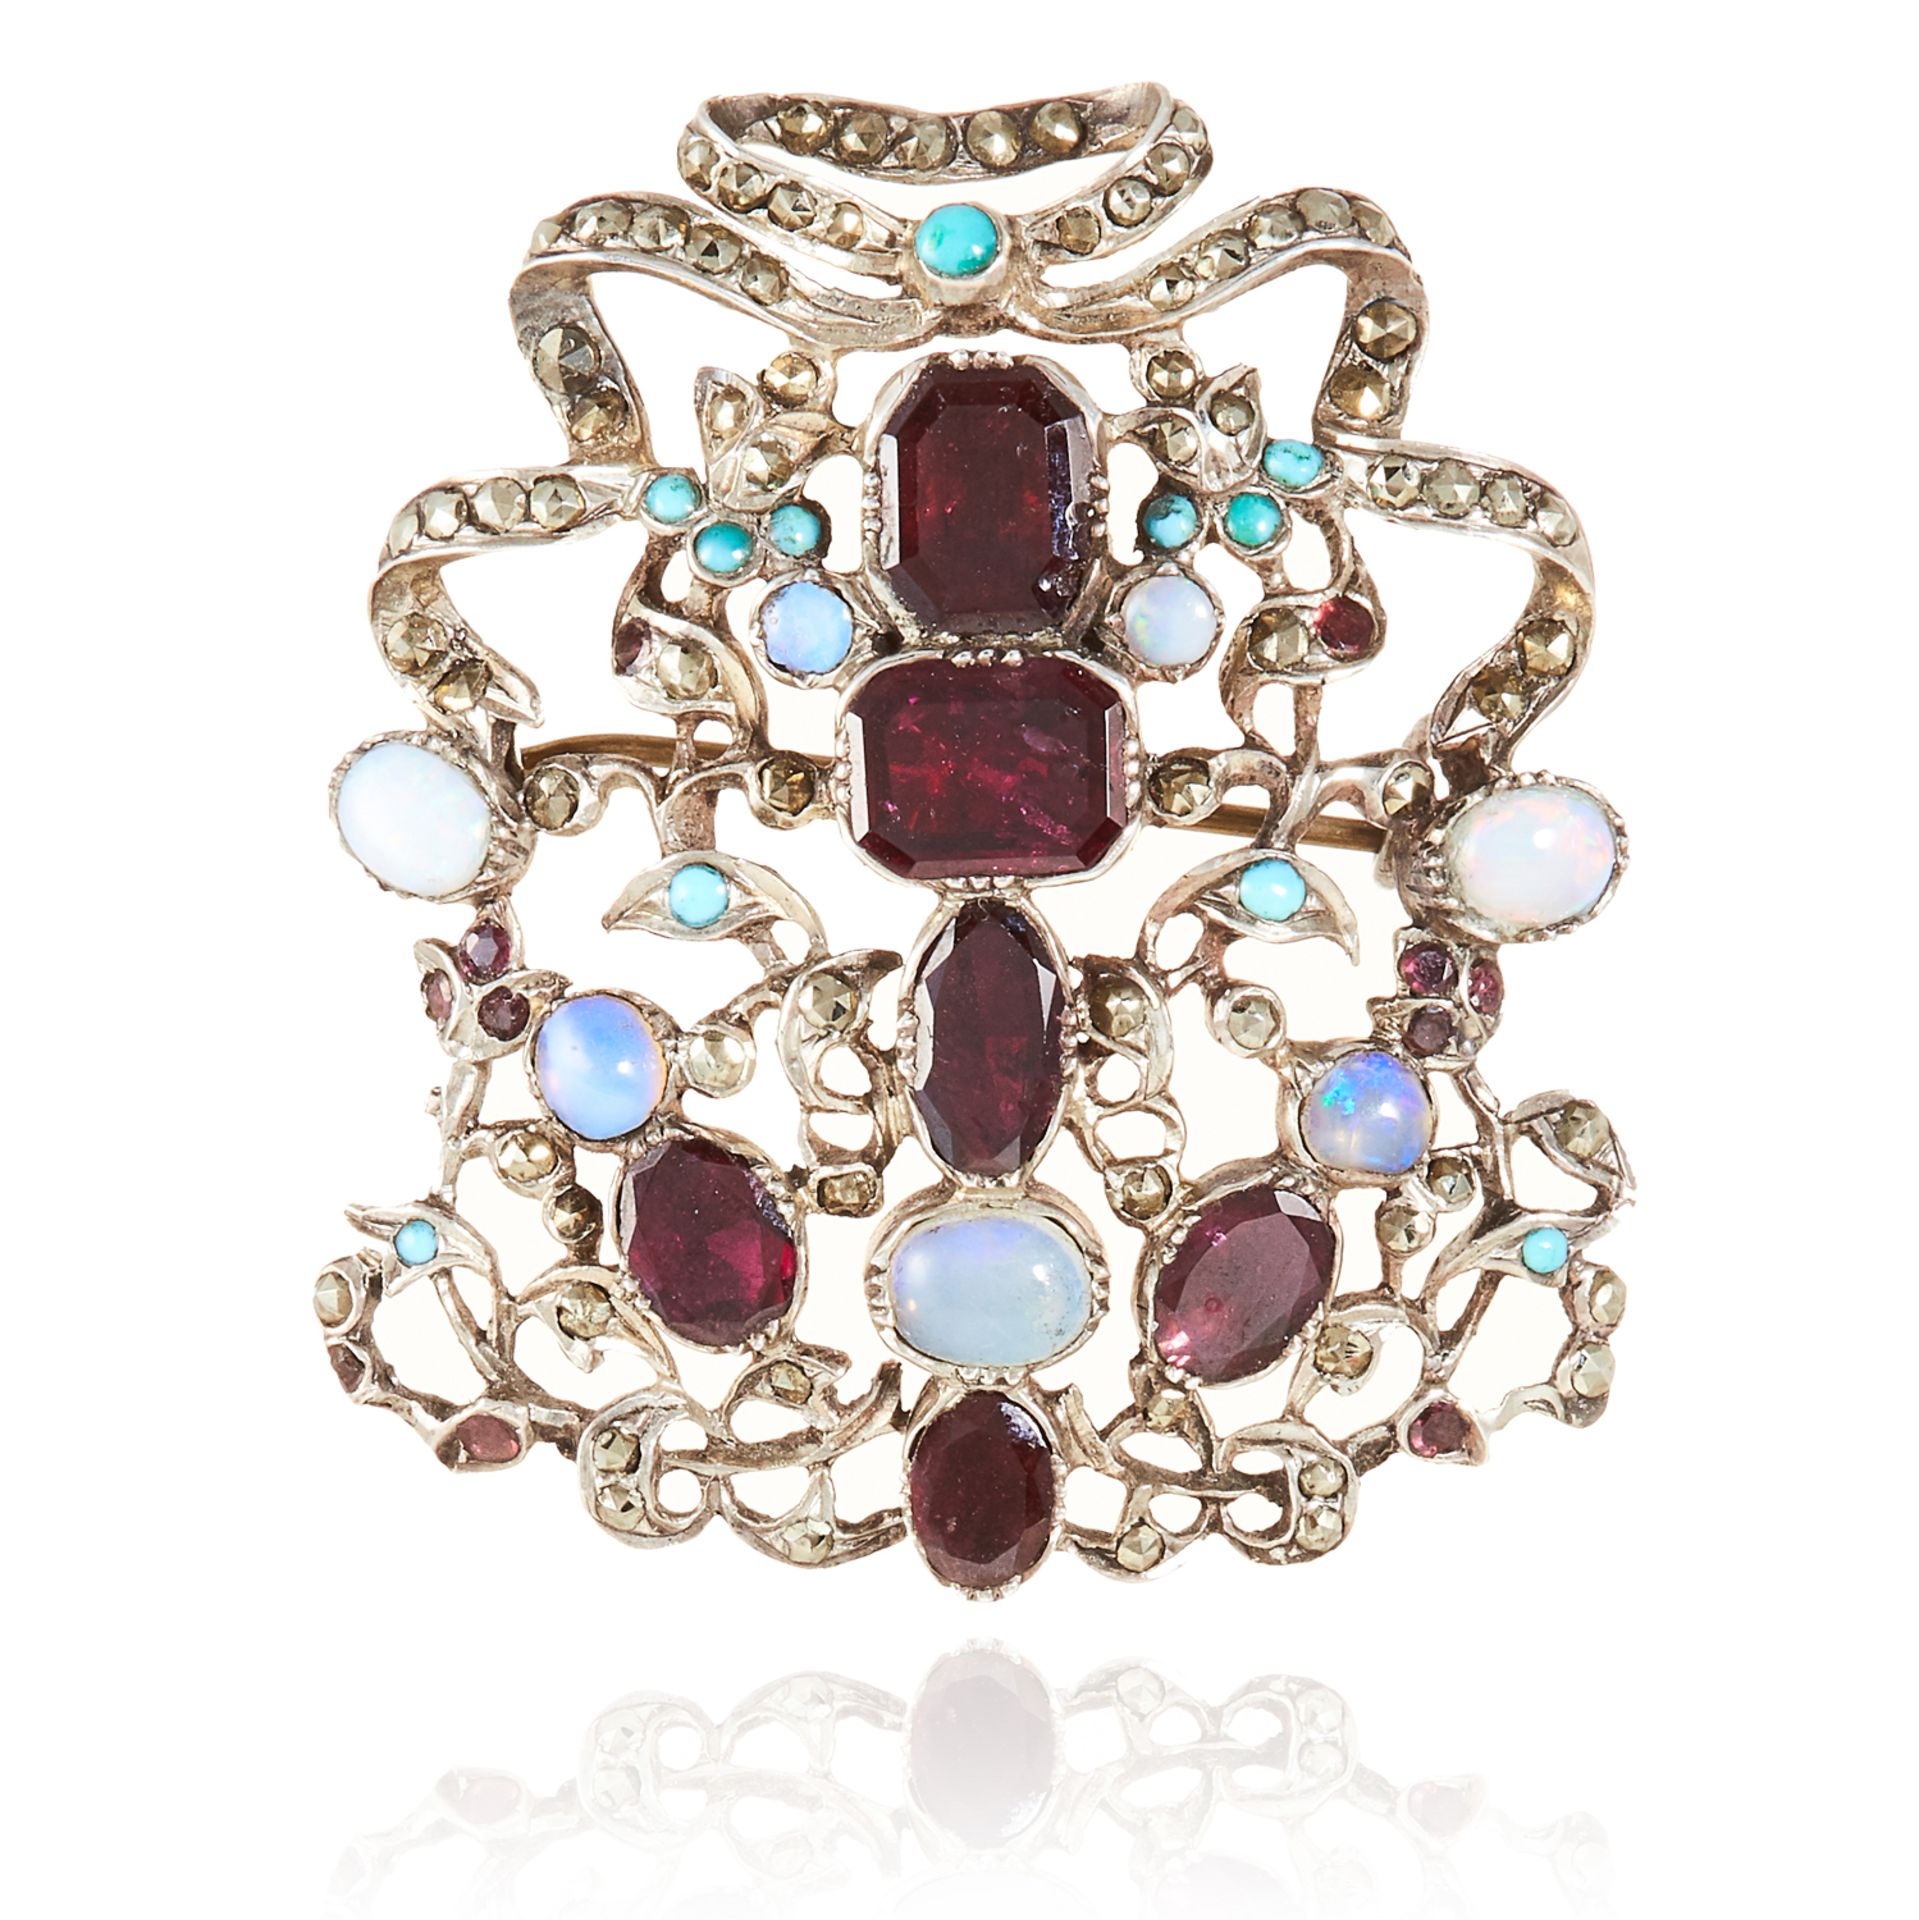 AN ANTIQUE GARNET, OPAL AND TURQUOISE BROOCH set with an array of gems, accented by marcasite,